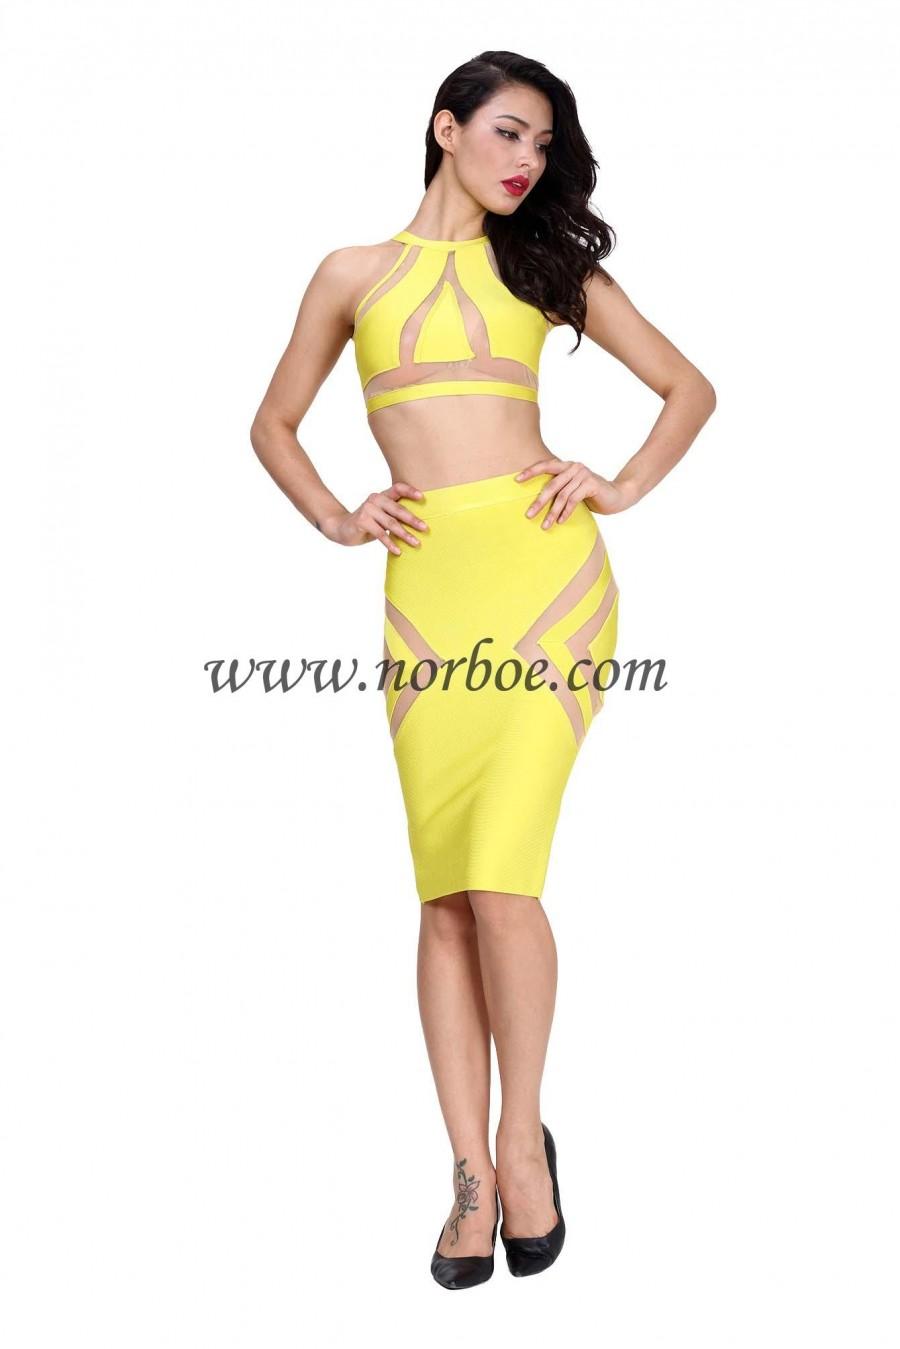 Wedding - Norboe Form Fitting Sexy Bandage Dress-Yellow